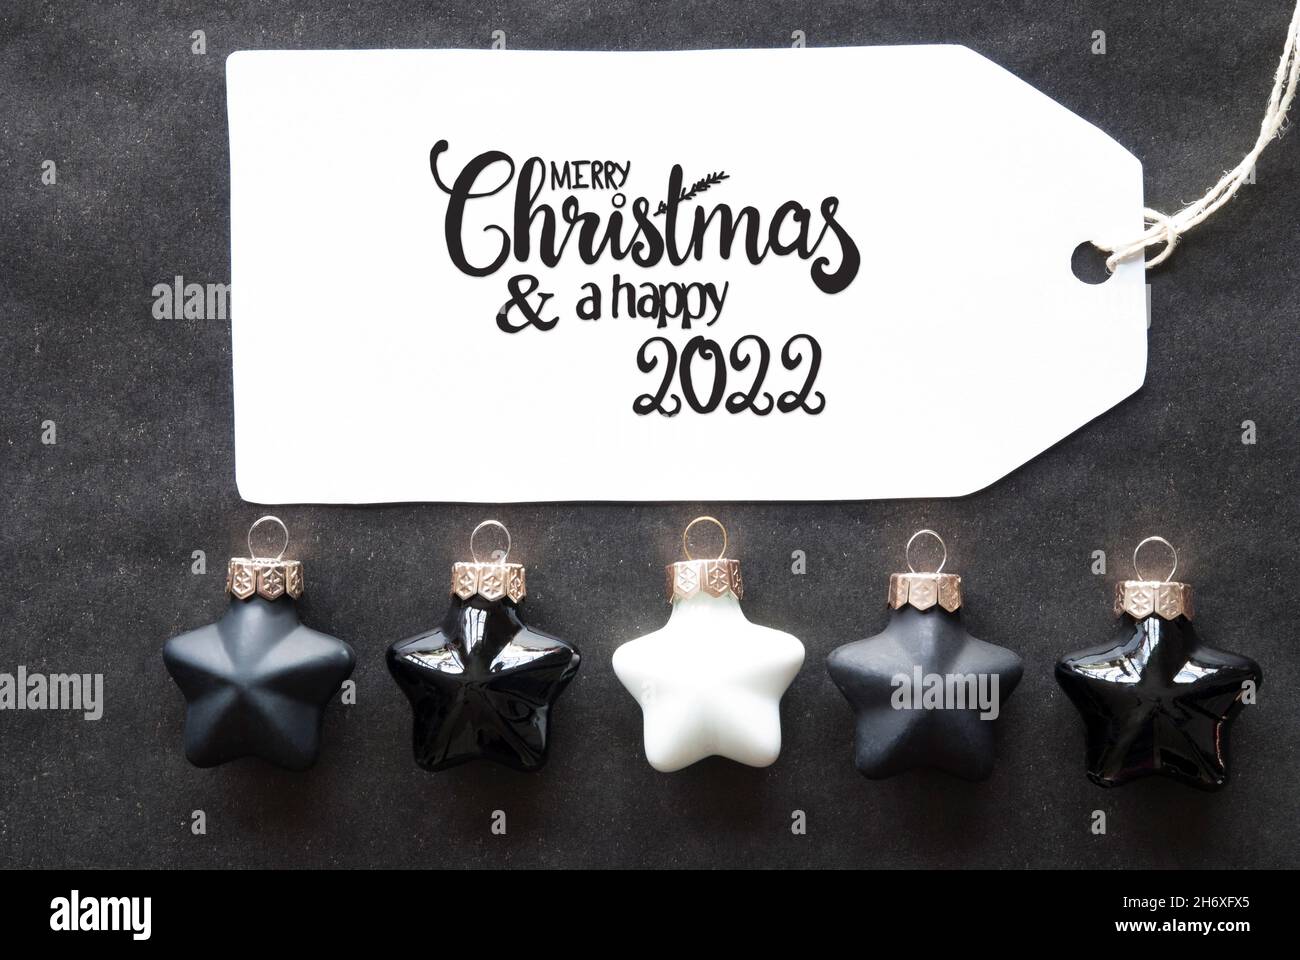 Black Christmas Ball, Label, Merry Christmas And A Happy 2022 Stock Photo